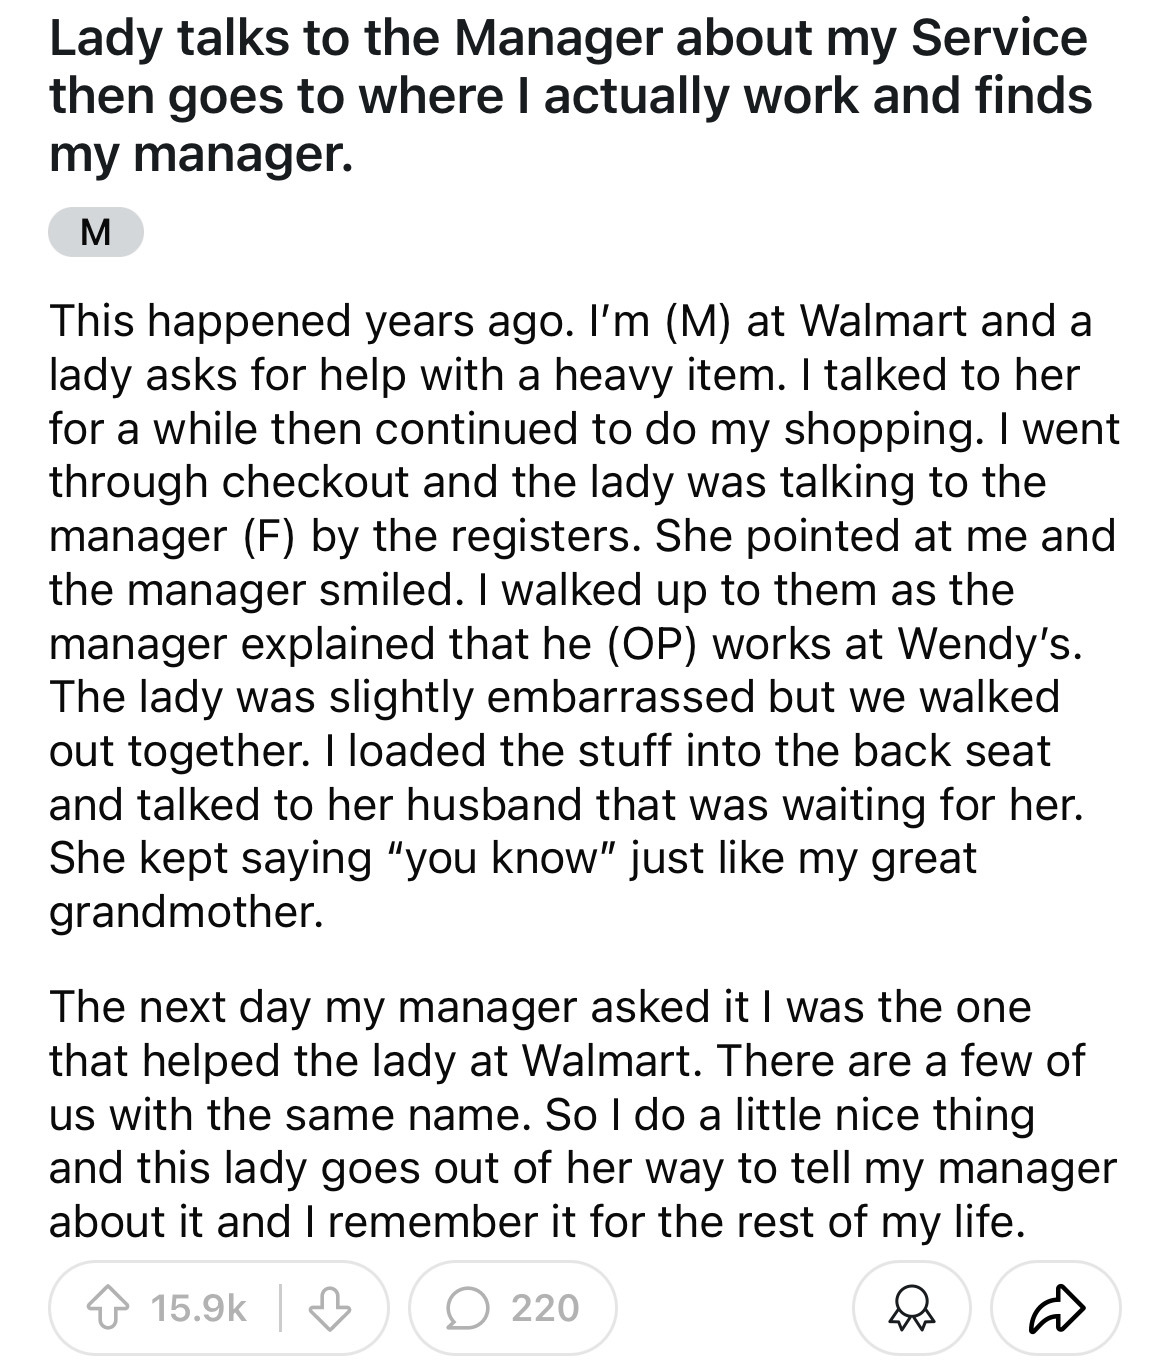 document - Lady talks to the Manager about my Service then goes to where I actually work and finds my manager. M This happened years ago. I'm M at Walmart and a lady asks for help with a heavy item. I talked to her for a while then continued to do my shop